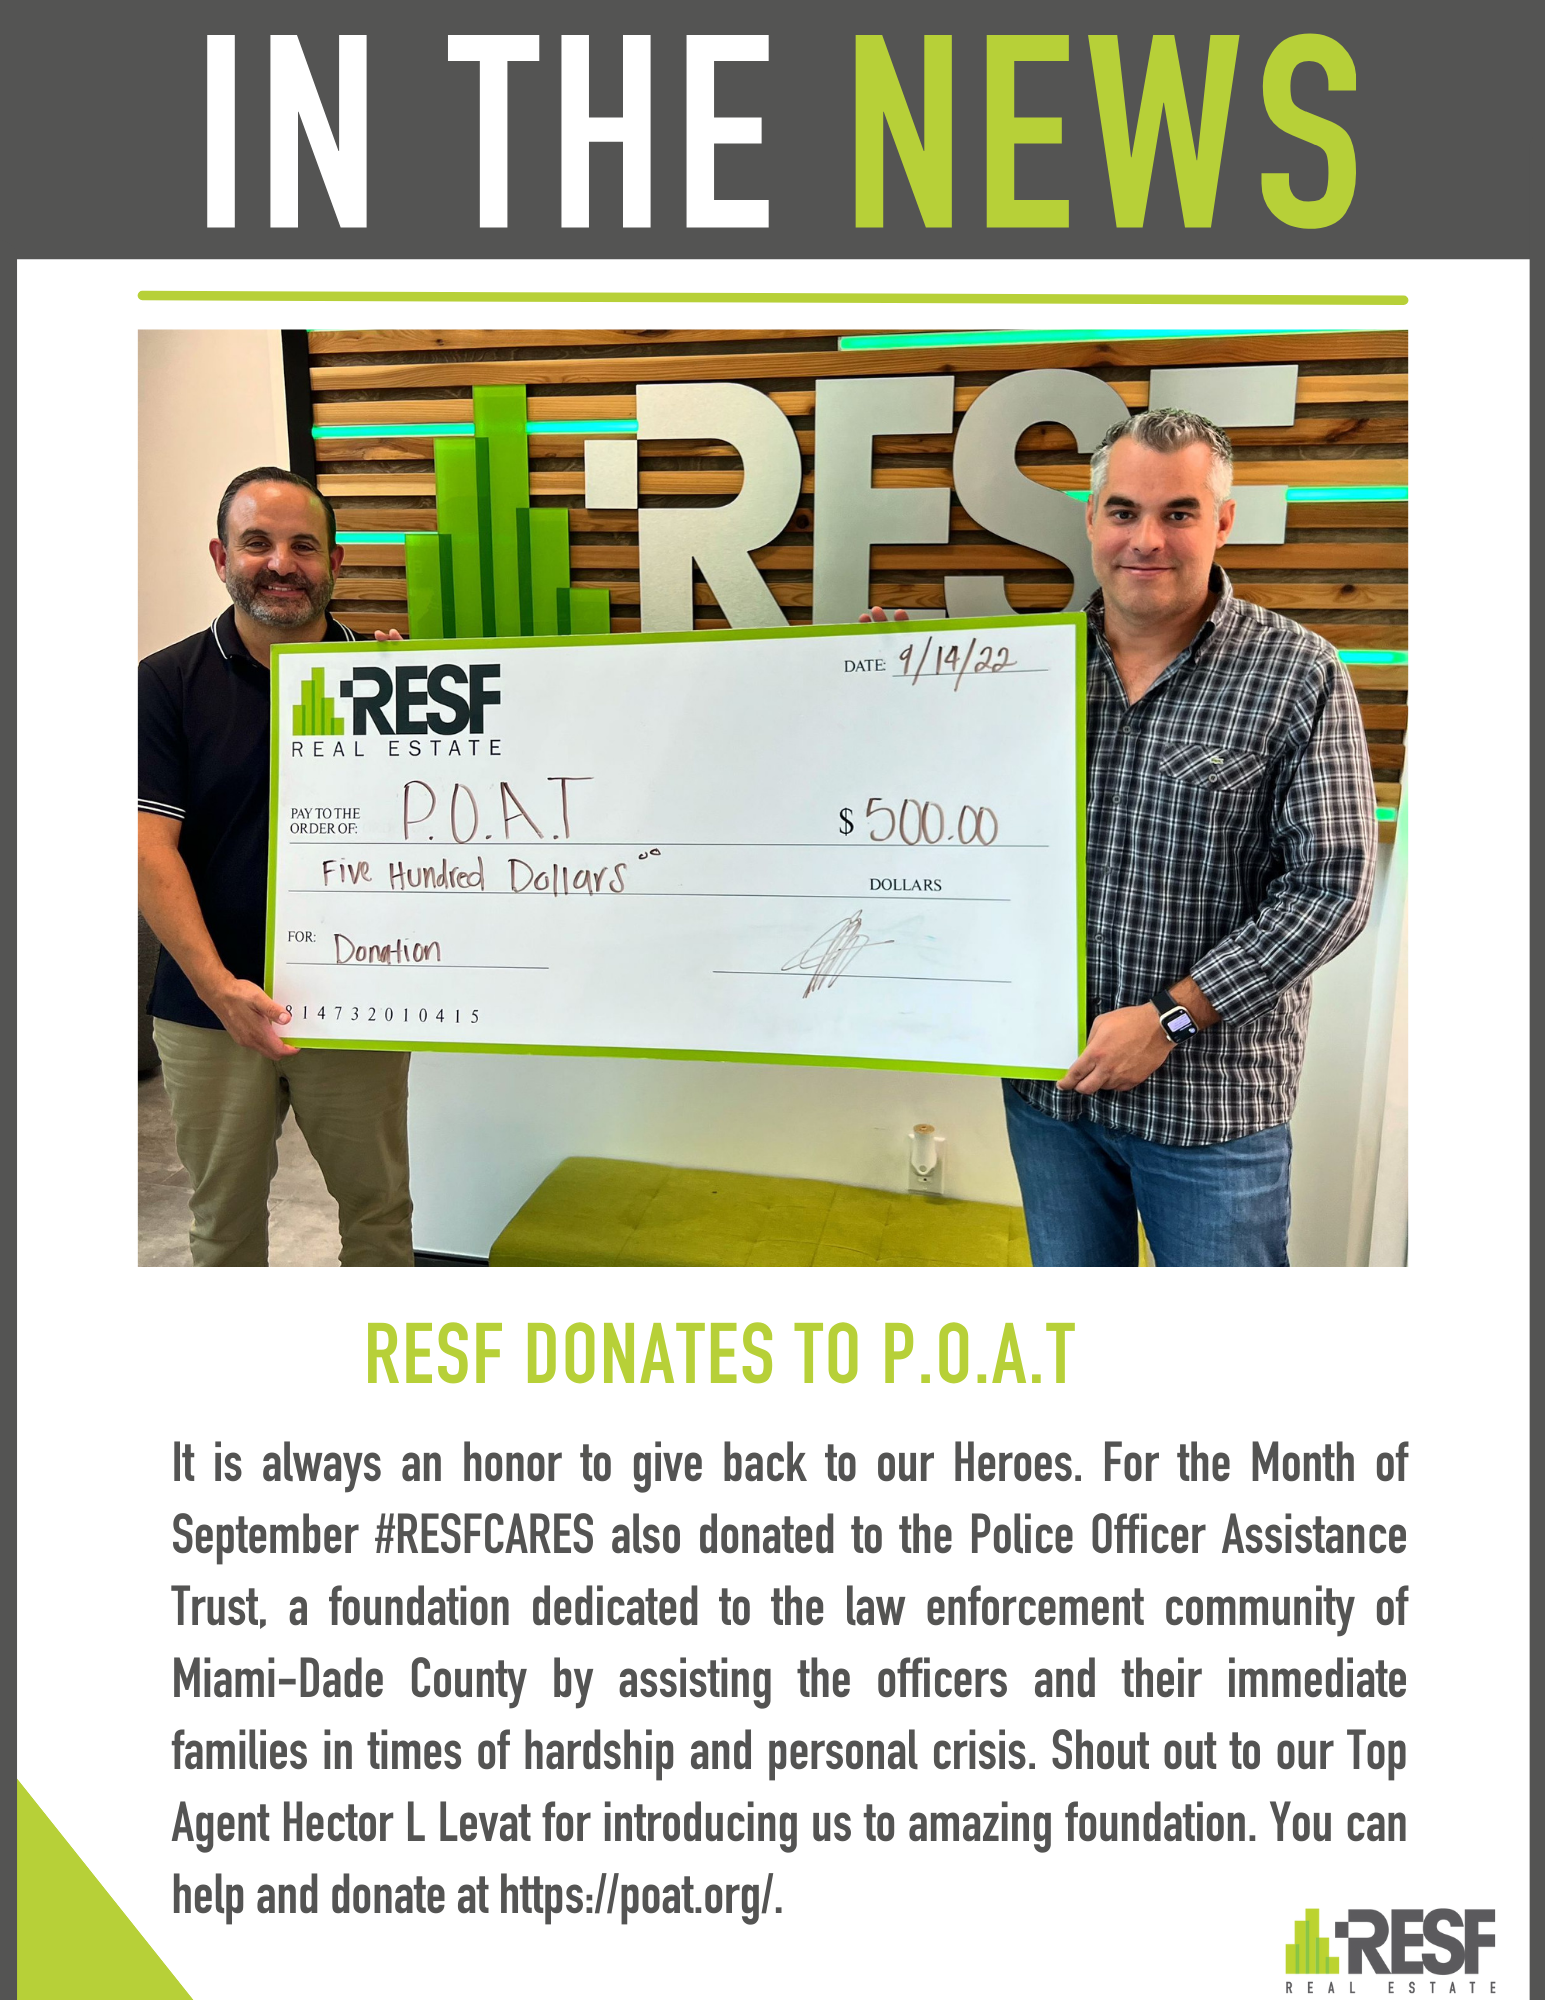 RESF Donates to P.O.A.T 👮🏻‍♂️👮🏾